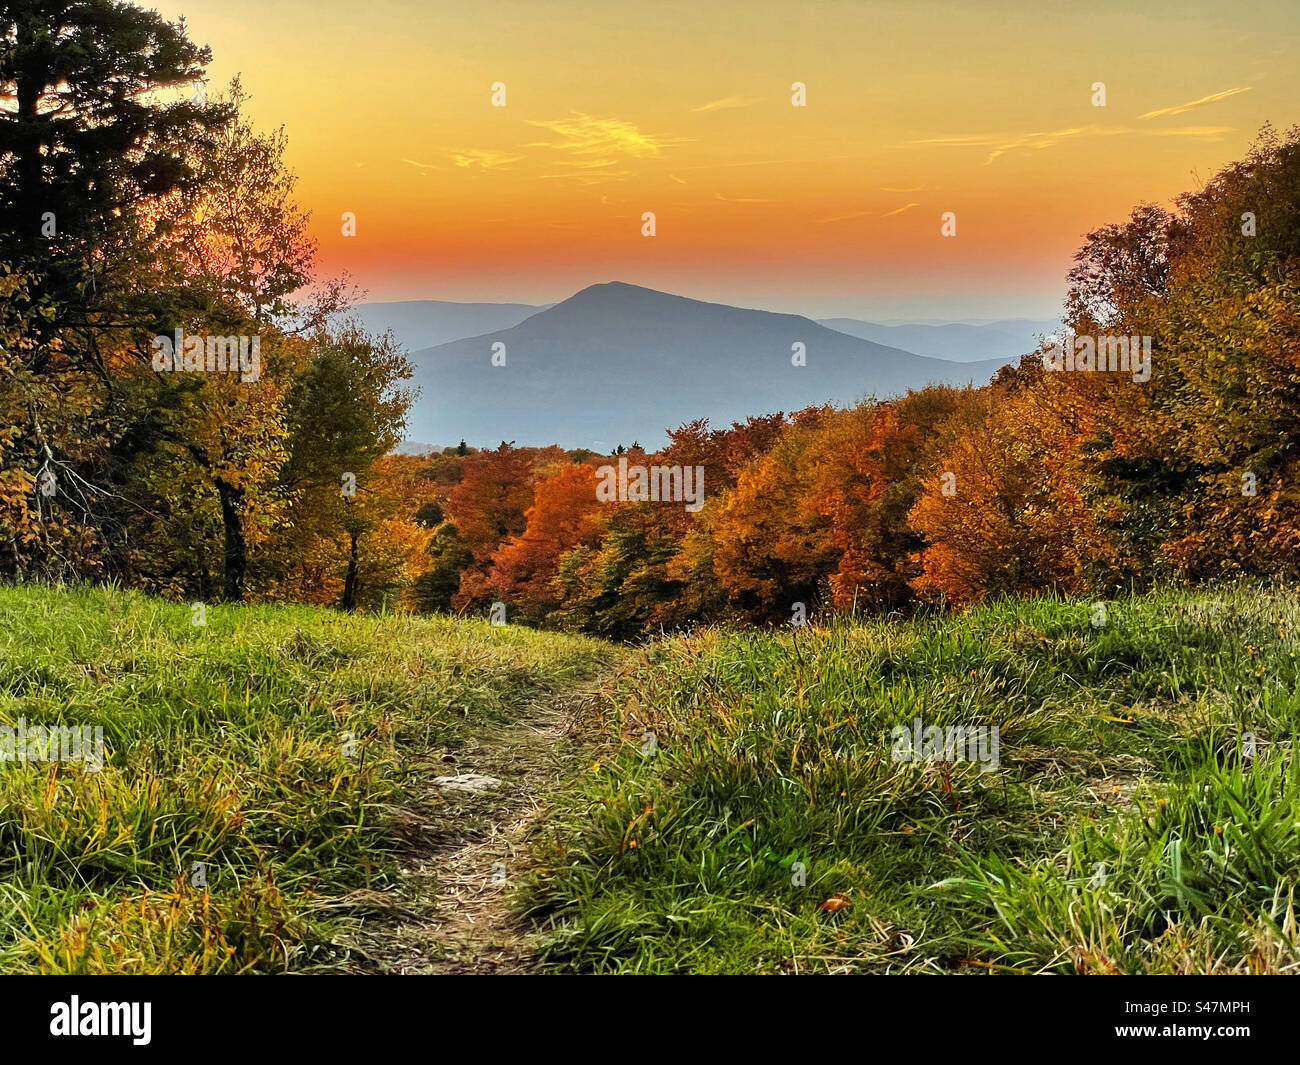 Sunset over the Long Trail that leads down a slope during fall foliage in Vermont. Stock Photo